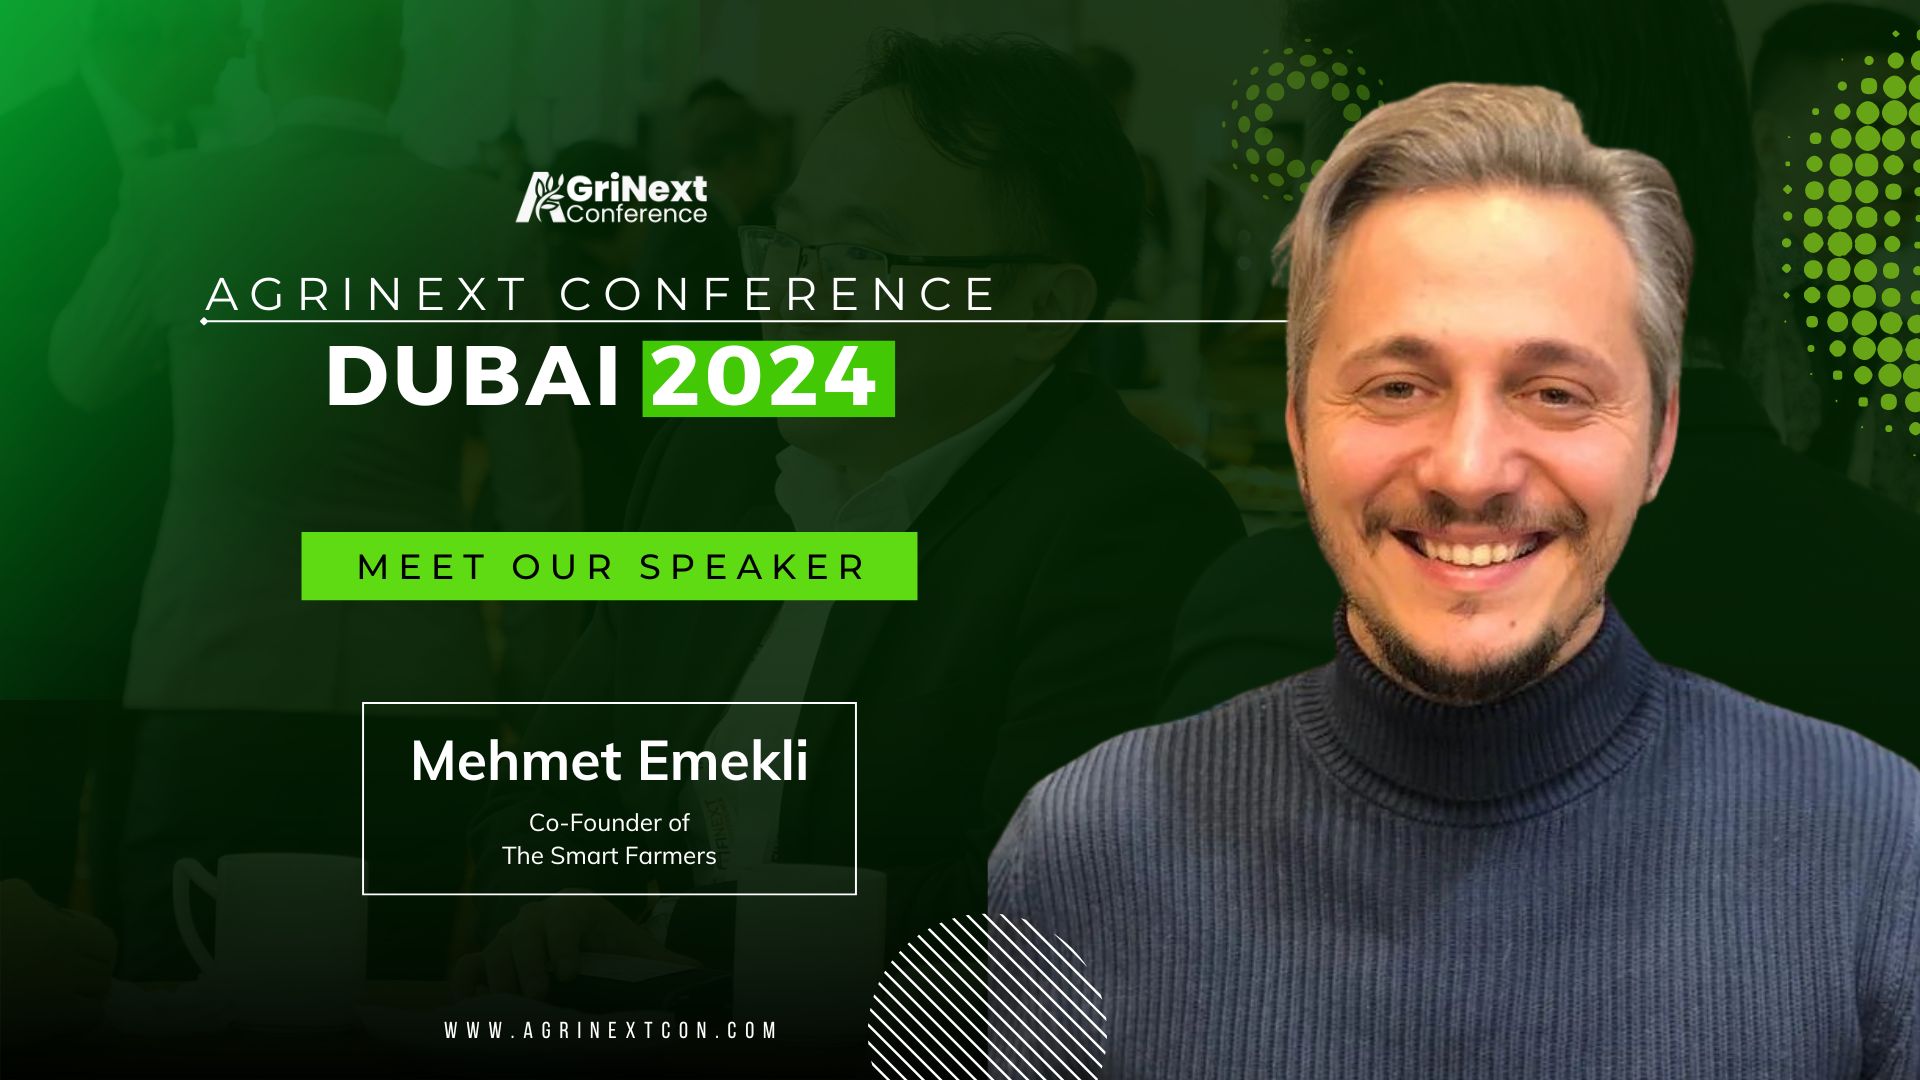 Mehmet Emekli, Co-founder of Smart Farms, to Speak at AgriNext Conference in Dubai